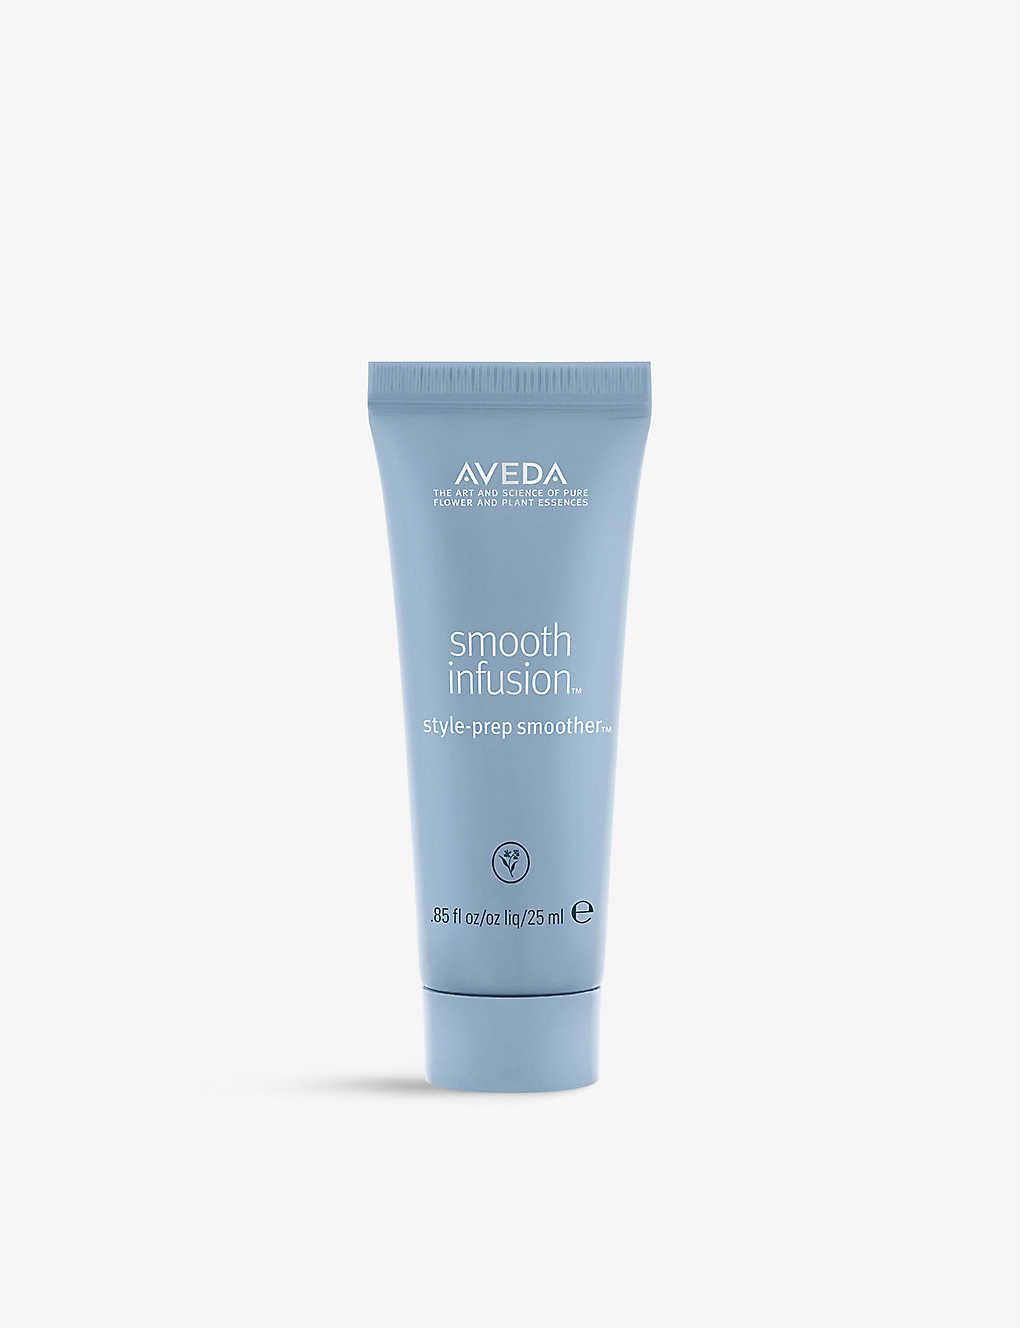 Aveda Smooth Infusion Style-prep Smoother Leave-in Treatment Serum 25ml